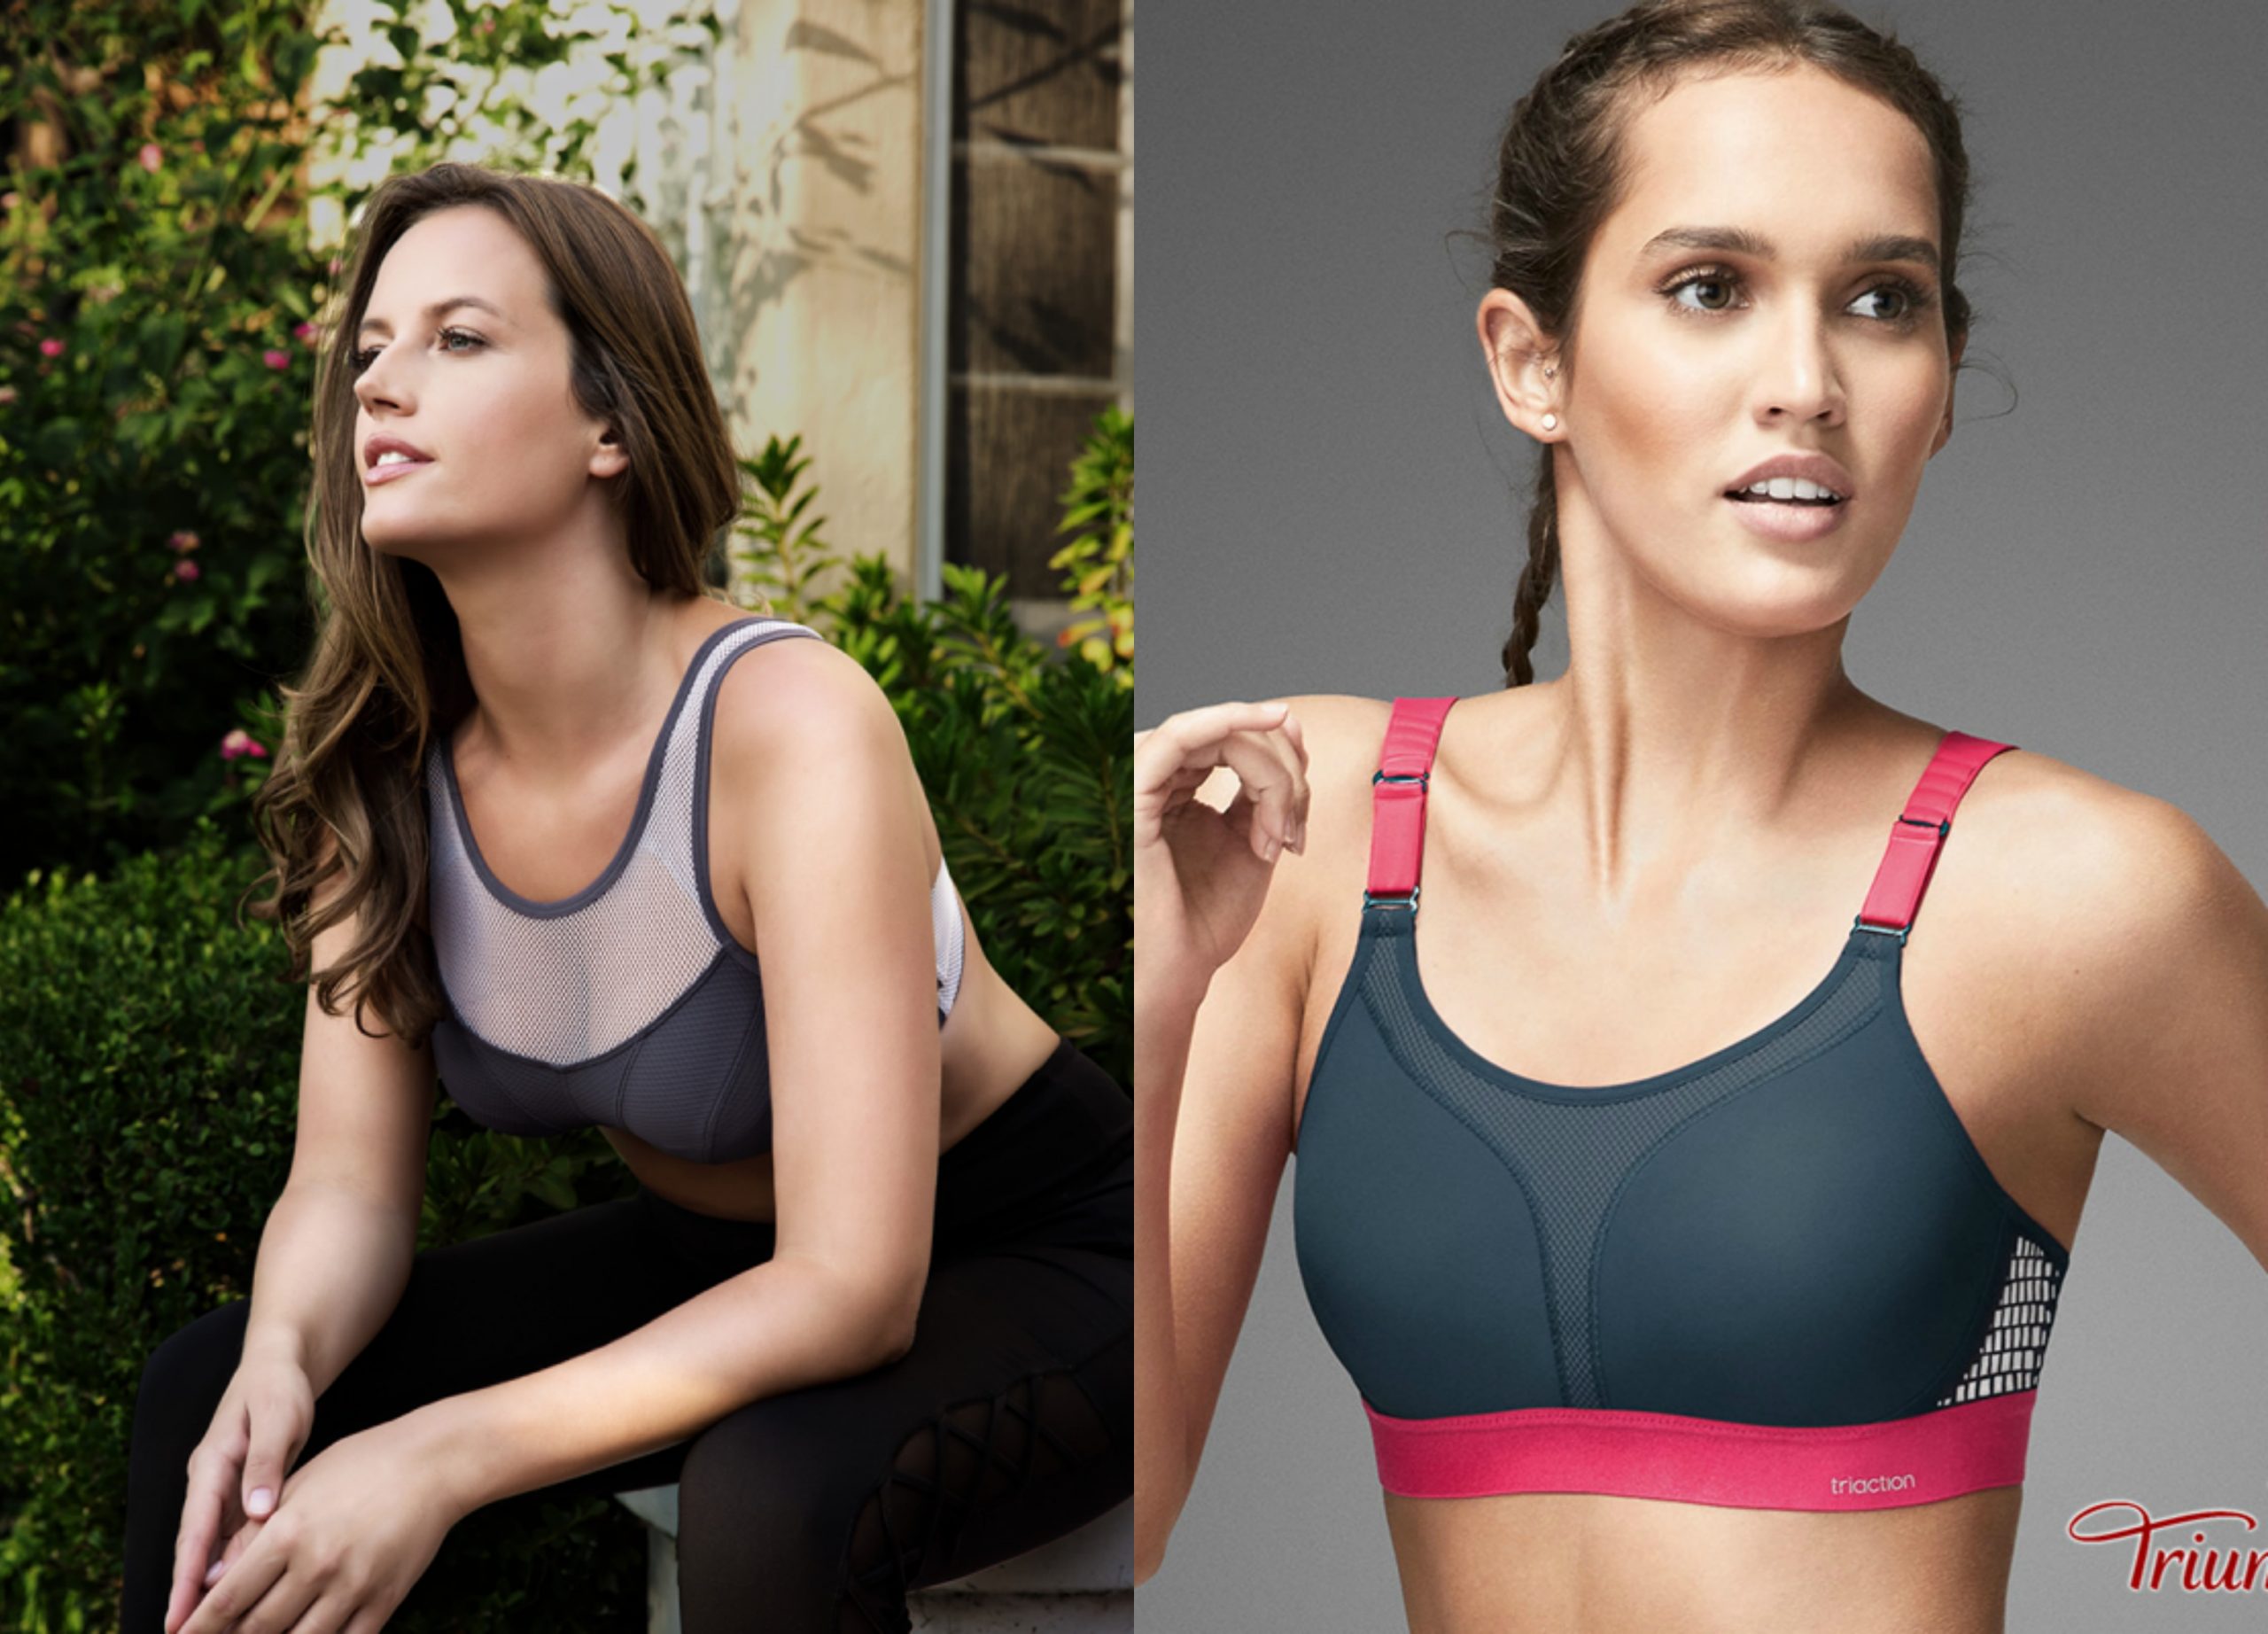 Can I Wear Sports Bras All The Time? - ParfaitLingerie.com - Blog